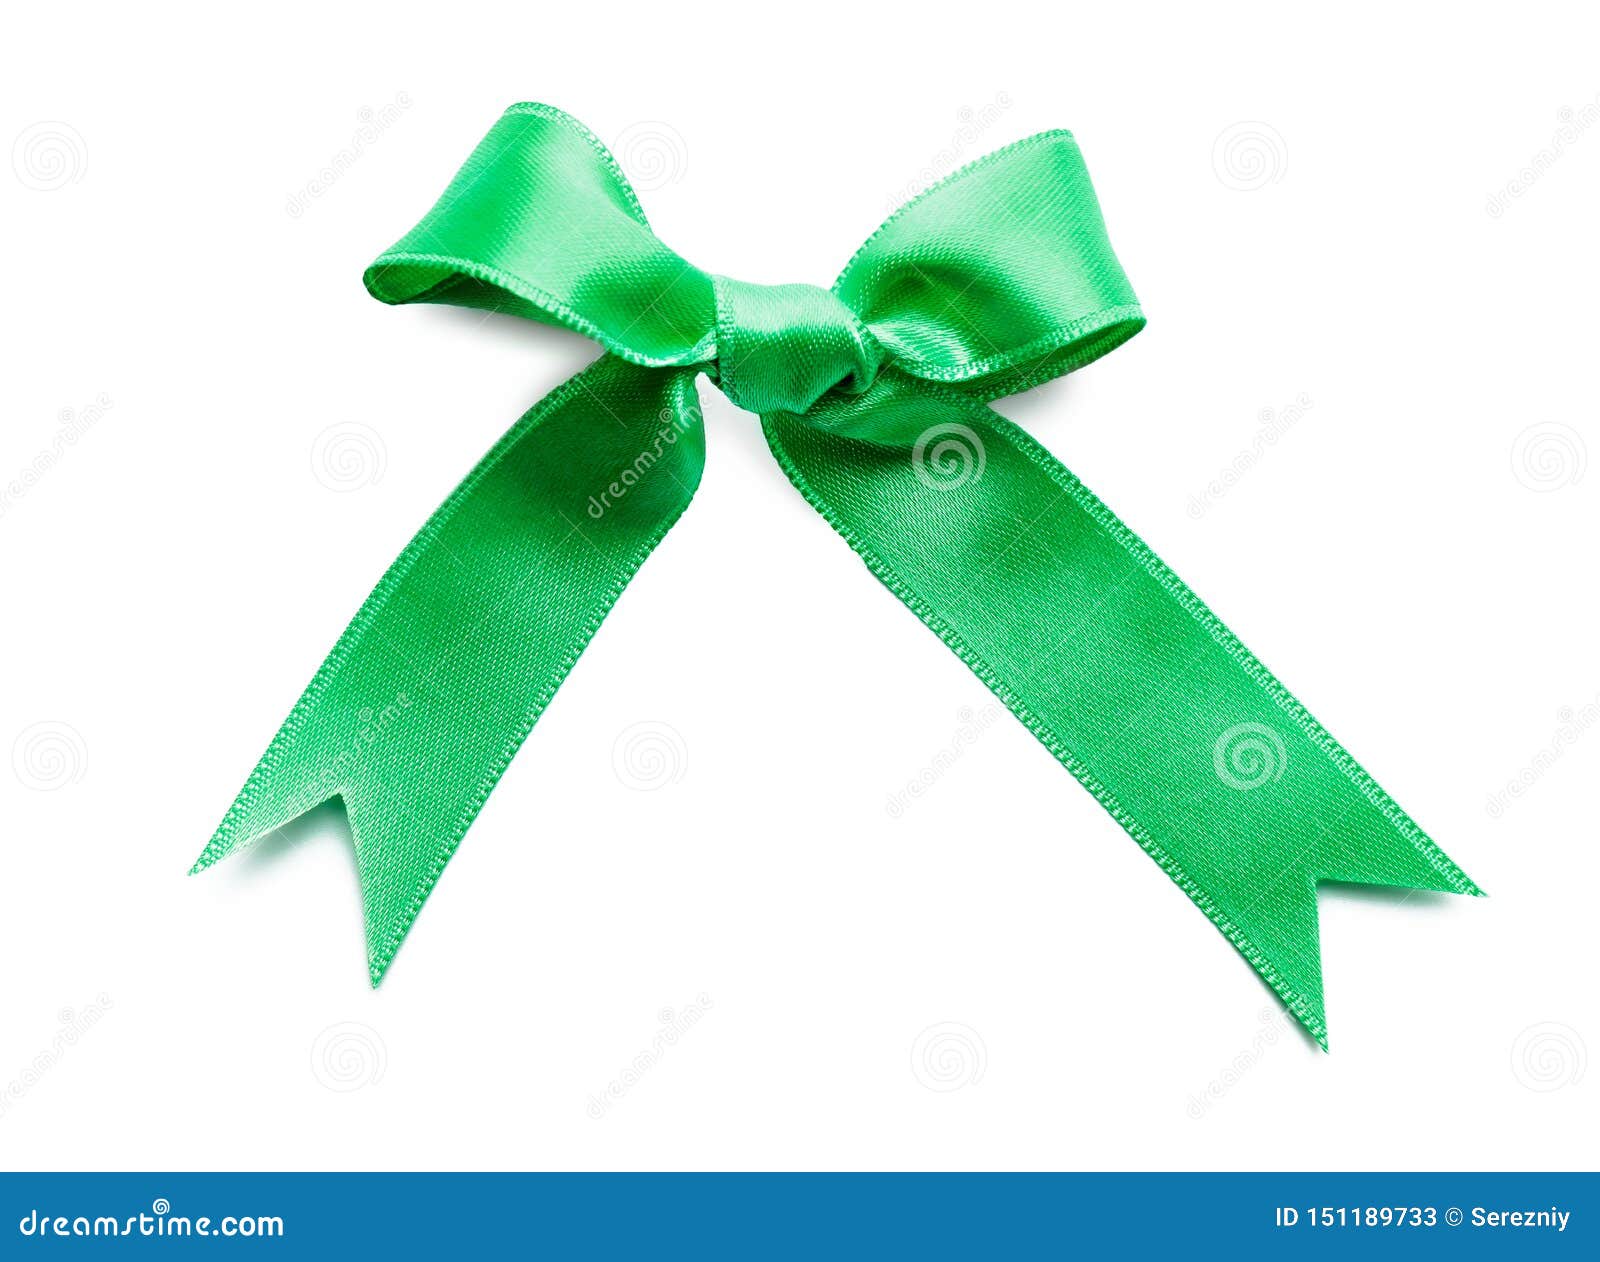 Bow from Green Satin Ribbon on White Background Stock Image - Image of ...